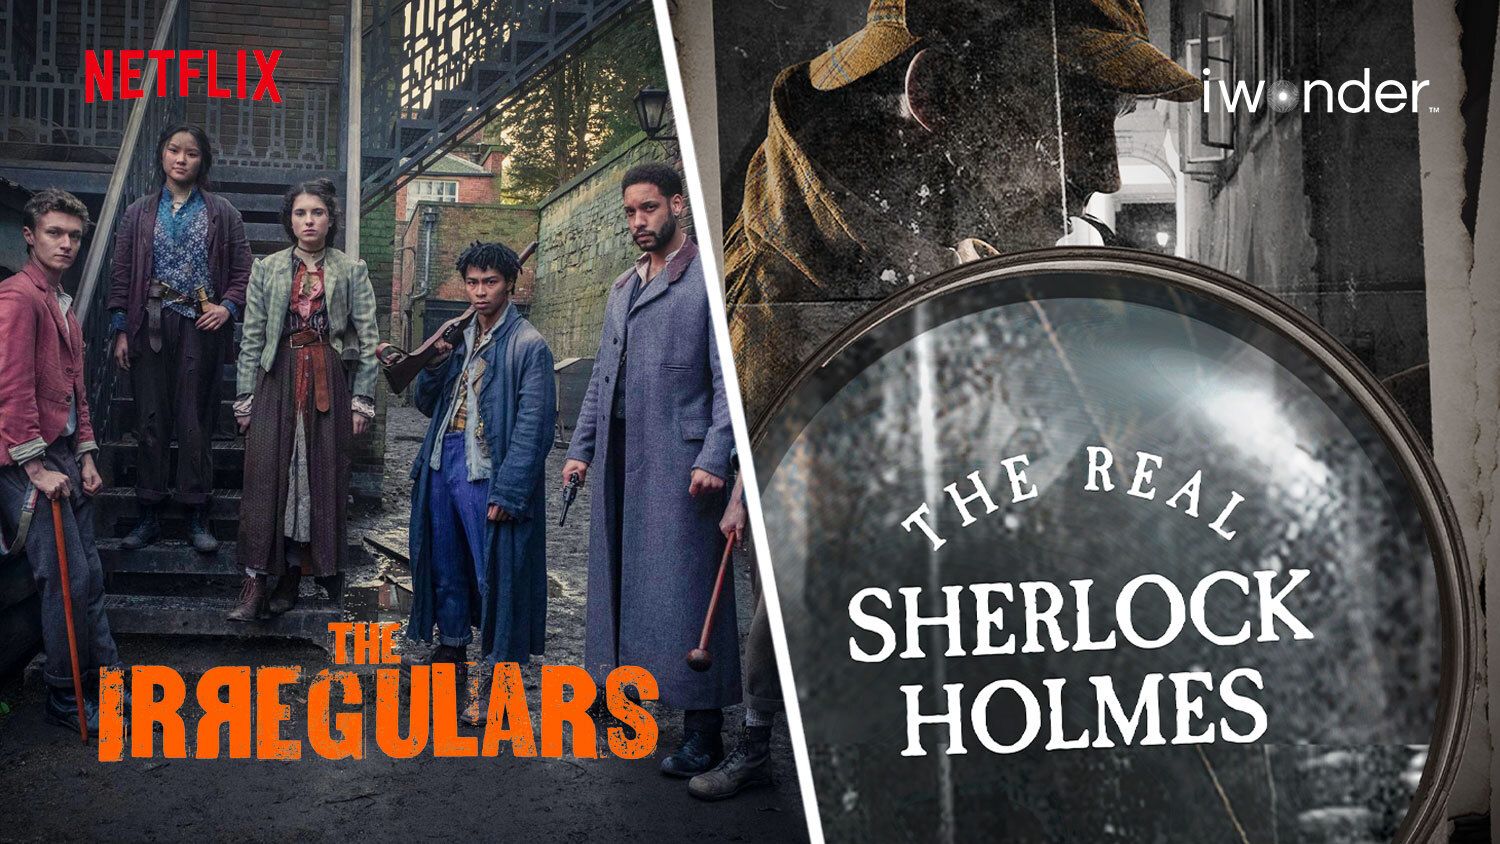 Documentary Pairings: The Irregulars served with The Real Sherlock Holmes